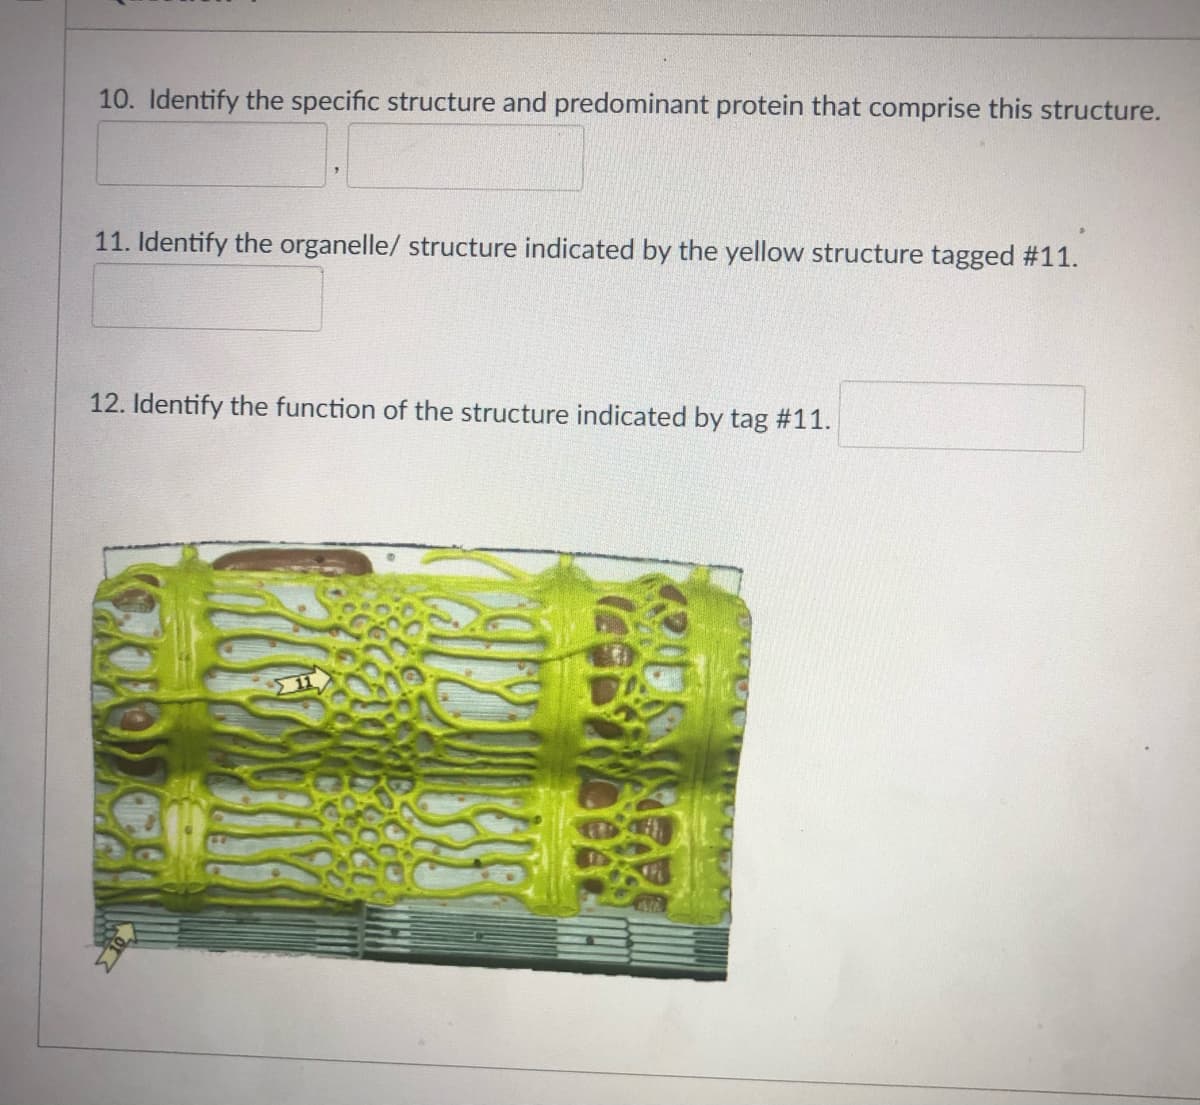 10. Identify the specific structure and predominant protein that comprise this structure.
11. Identify the organelle/ structure indicated by the yellow structure tagged #11.
12. Identify the function of the structure indicated by tag #11.
ΣΤ
